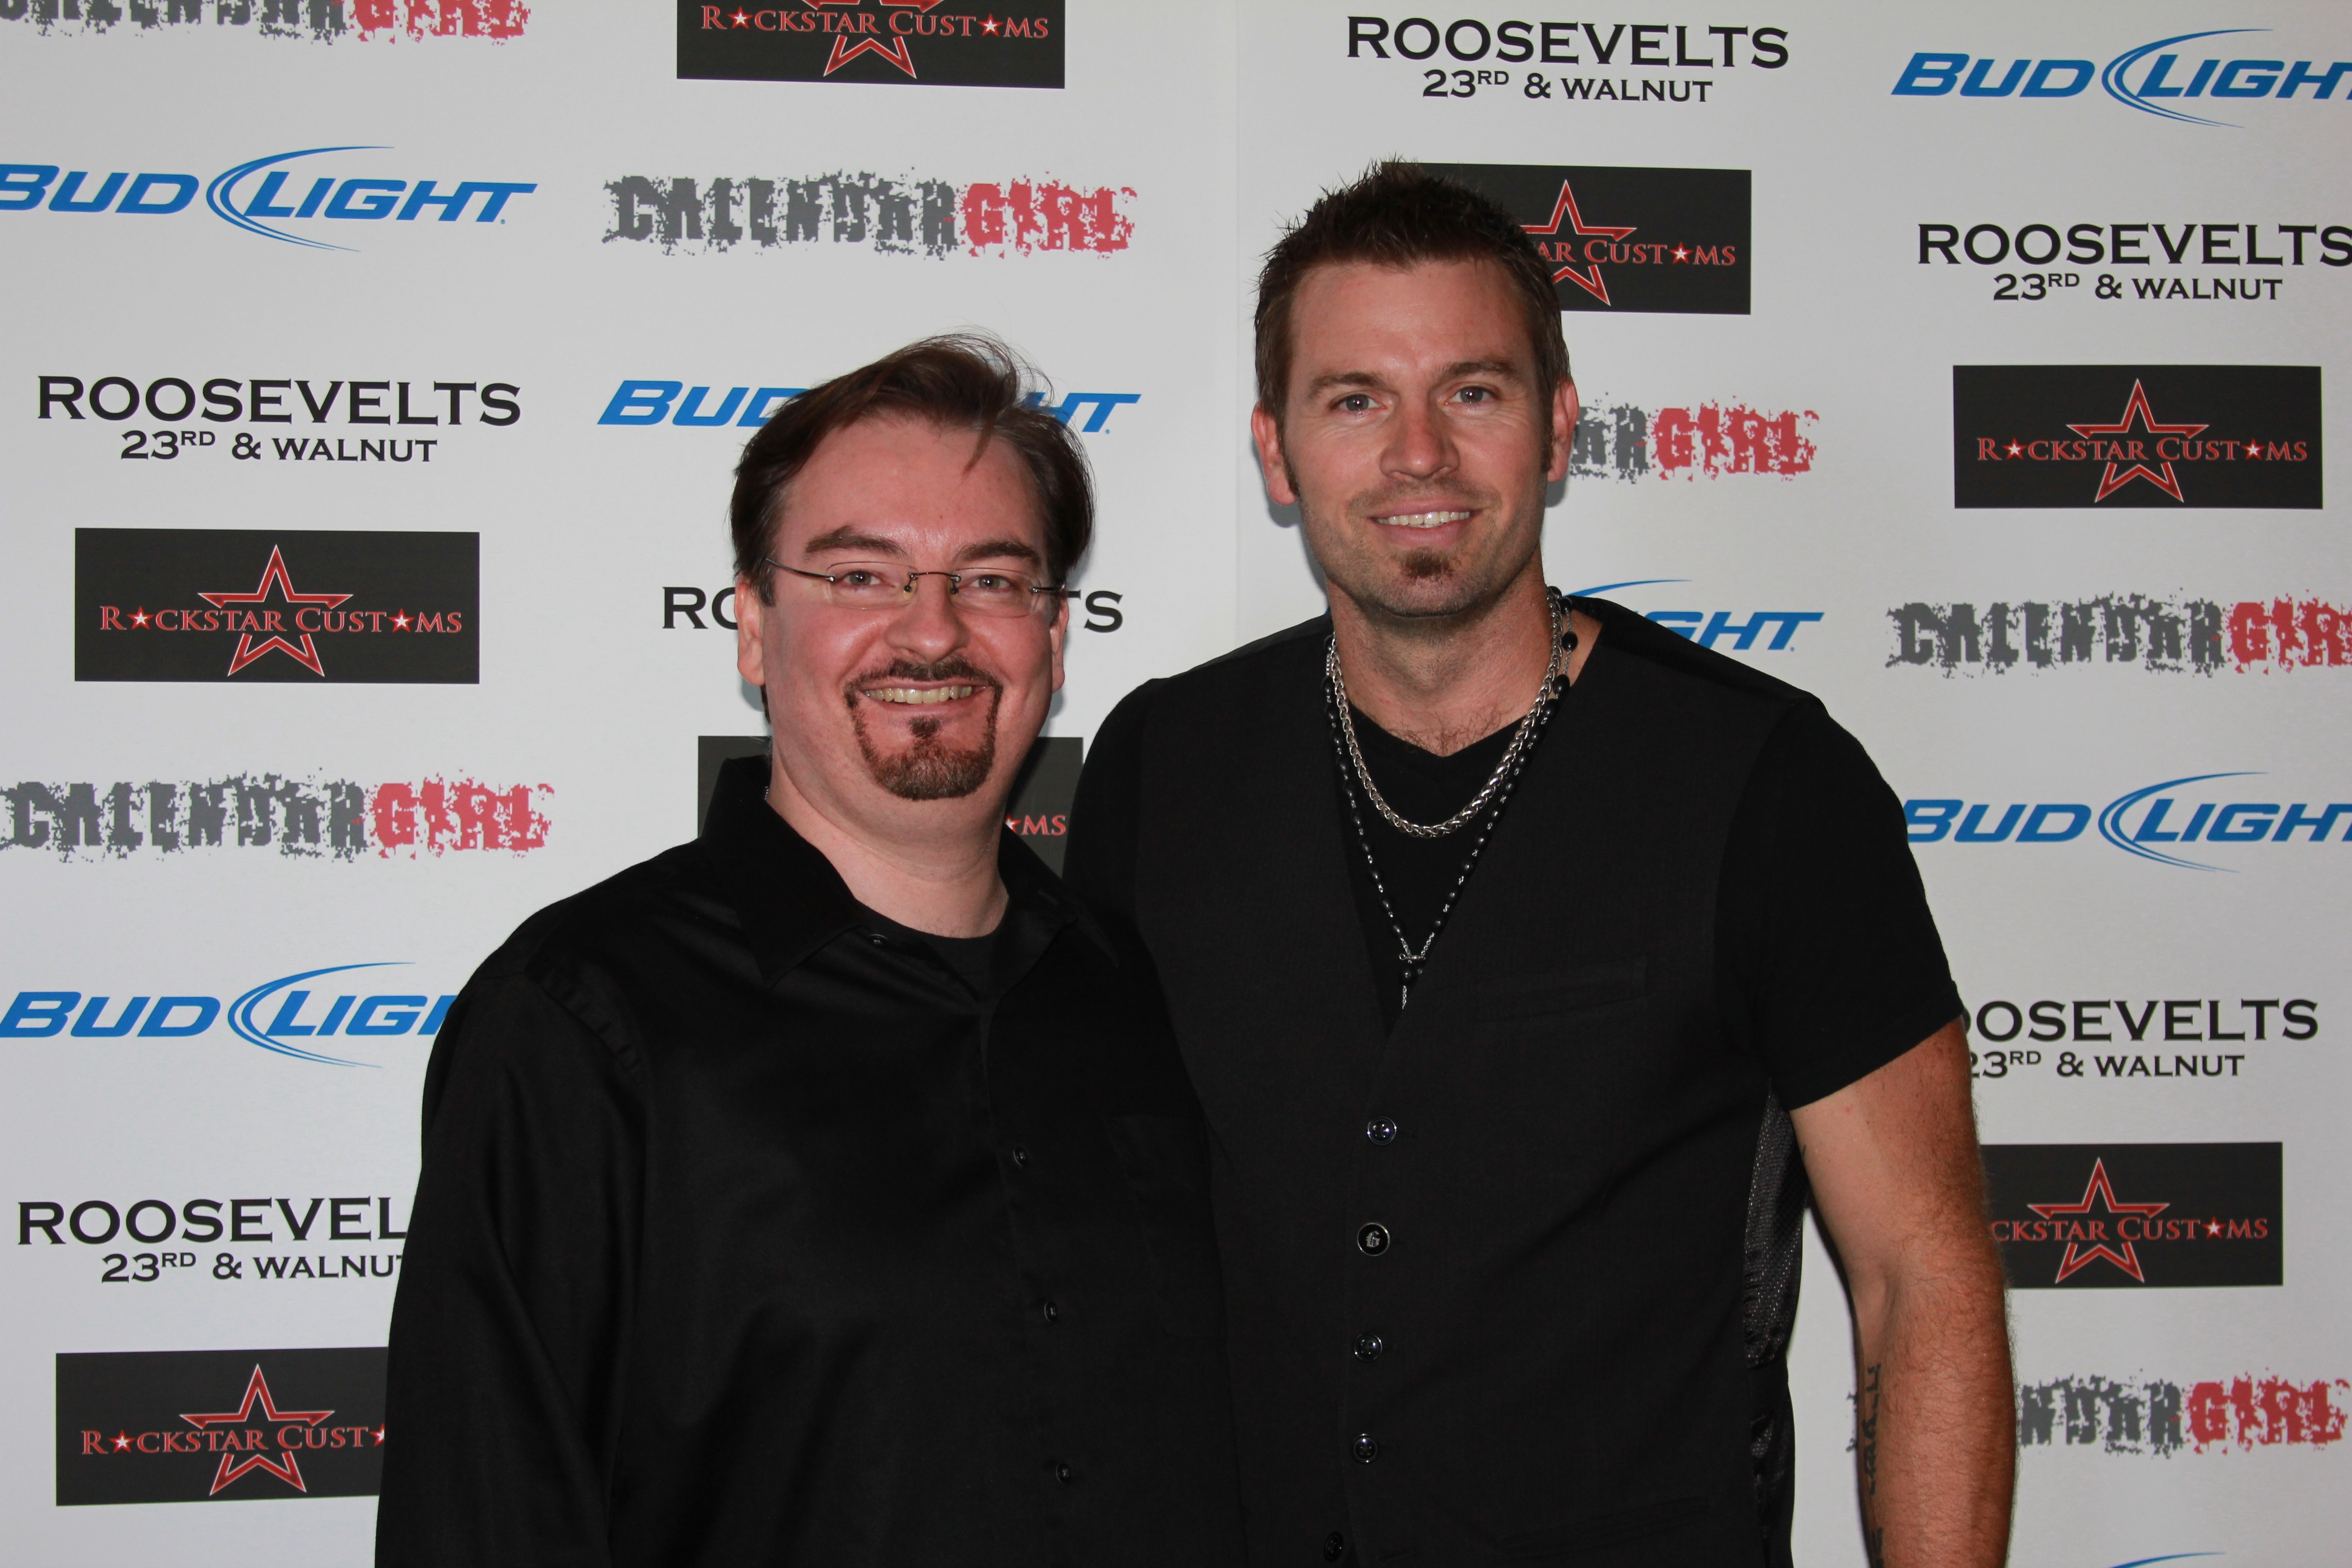 Ellis Walding and Brian O'Halloran at the Calendar Girl Movie Preview Party in Philadelphia